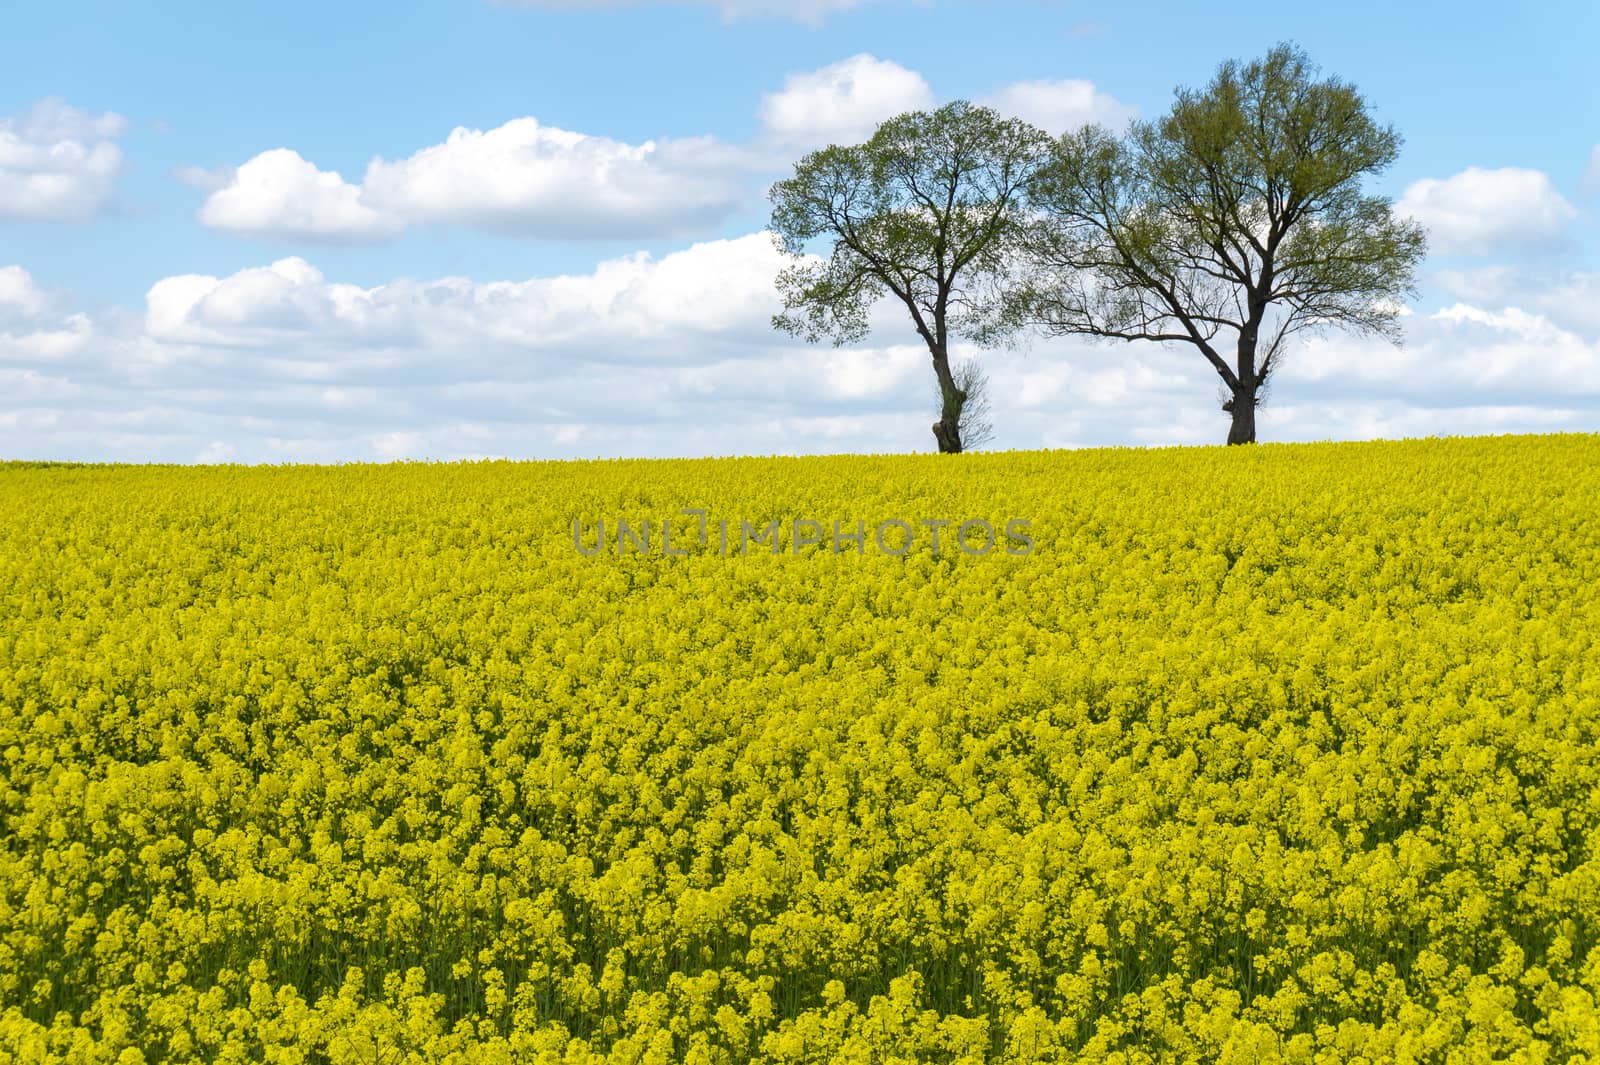 Vivid colors of yellow field in rural landscape with two distant standalone trees under blue sky with white clouds